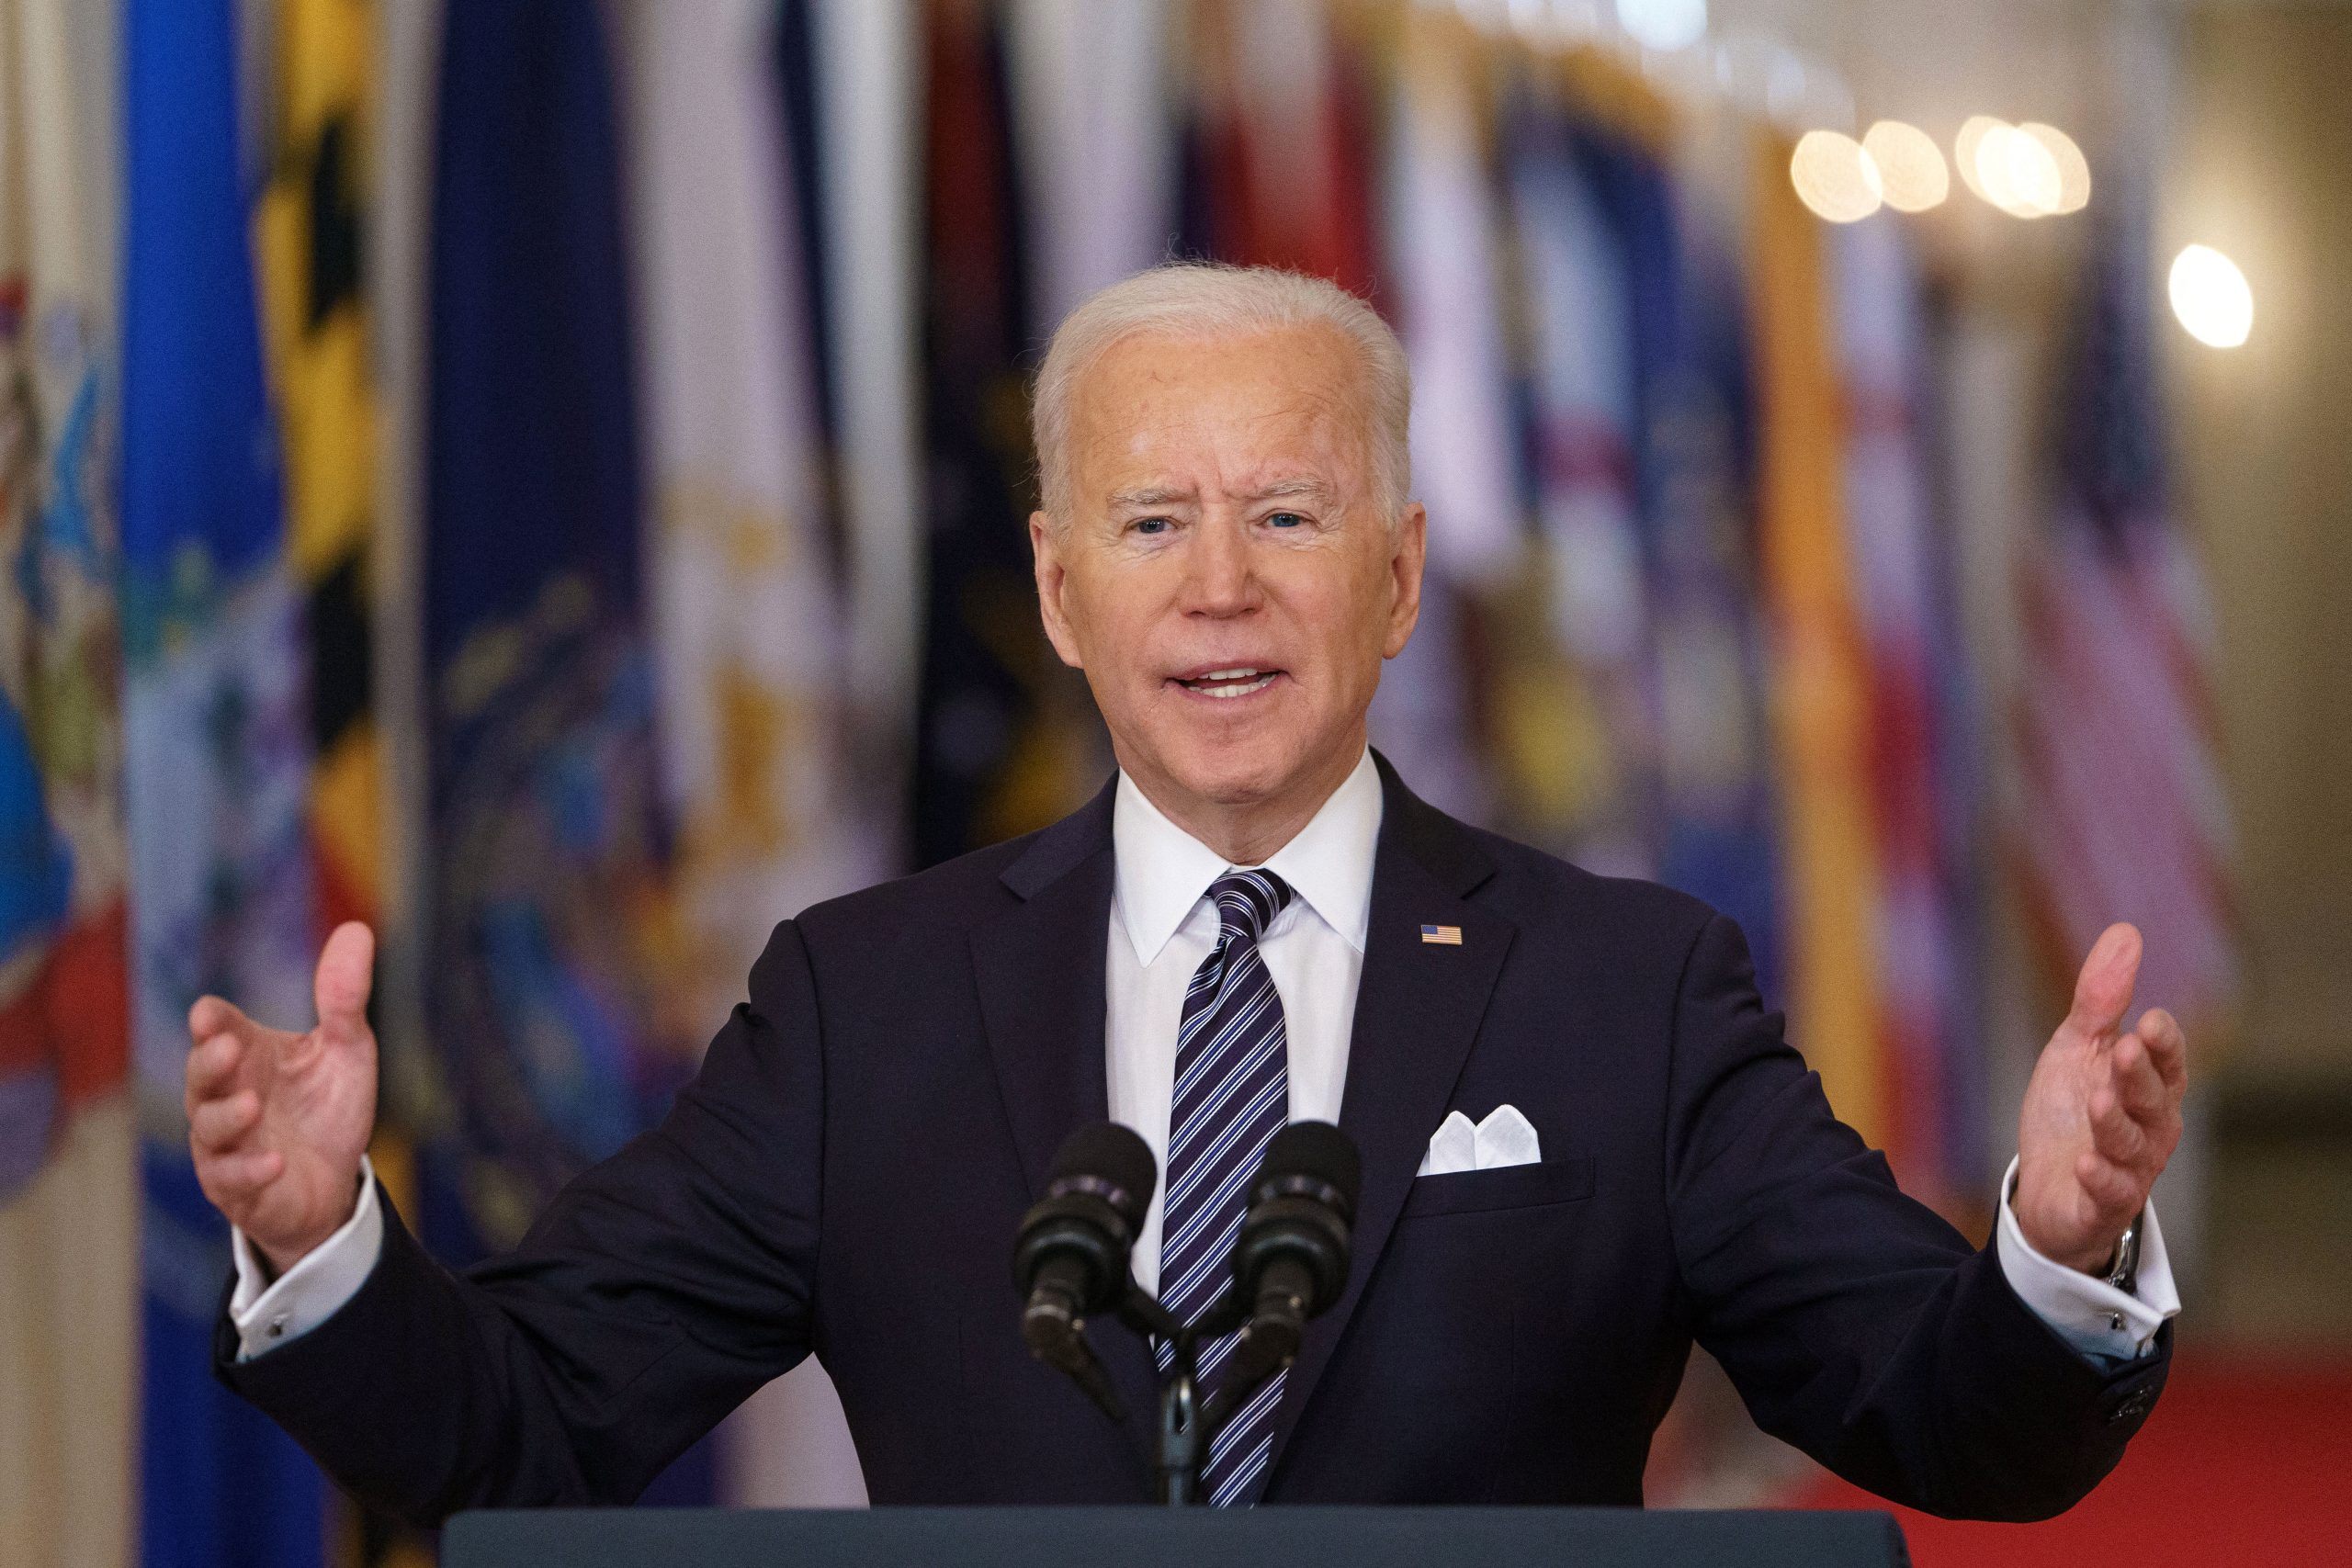 Joe Biden’s State of the Union Address: When and where to watch